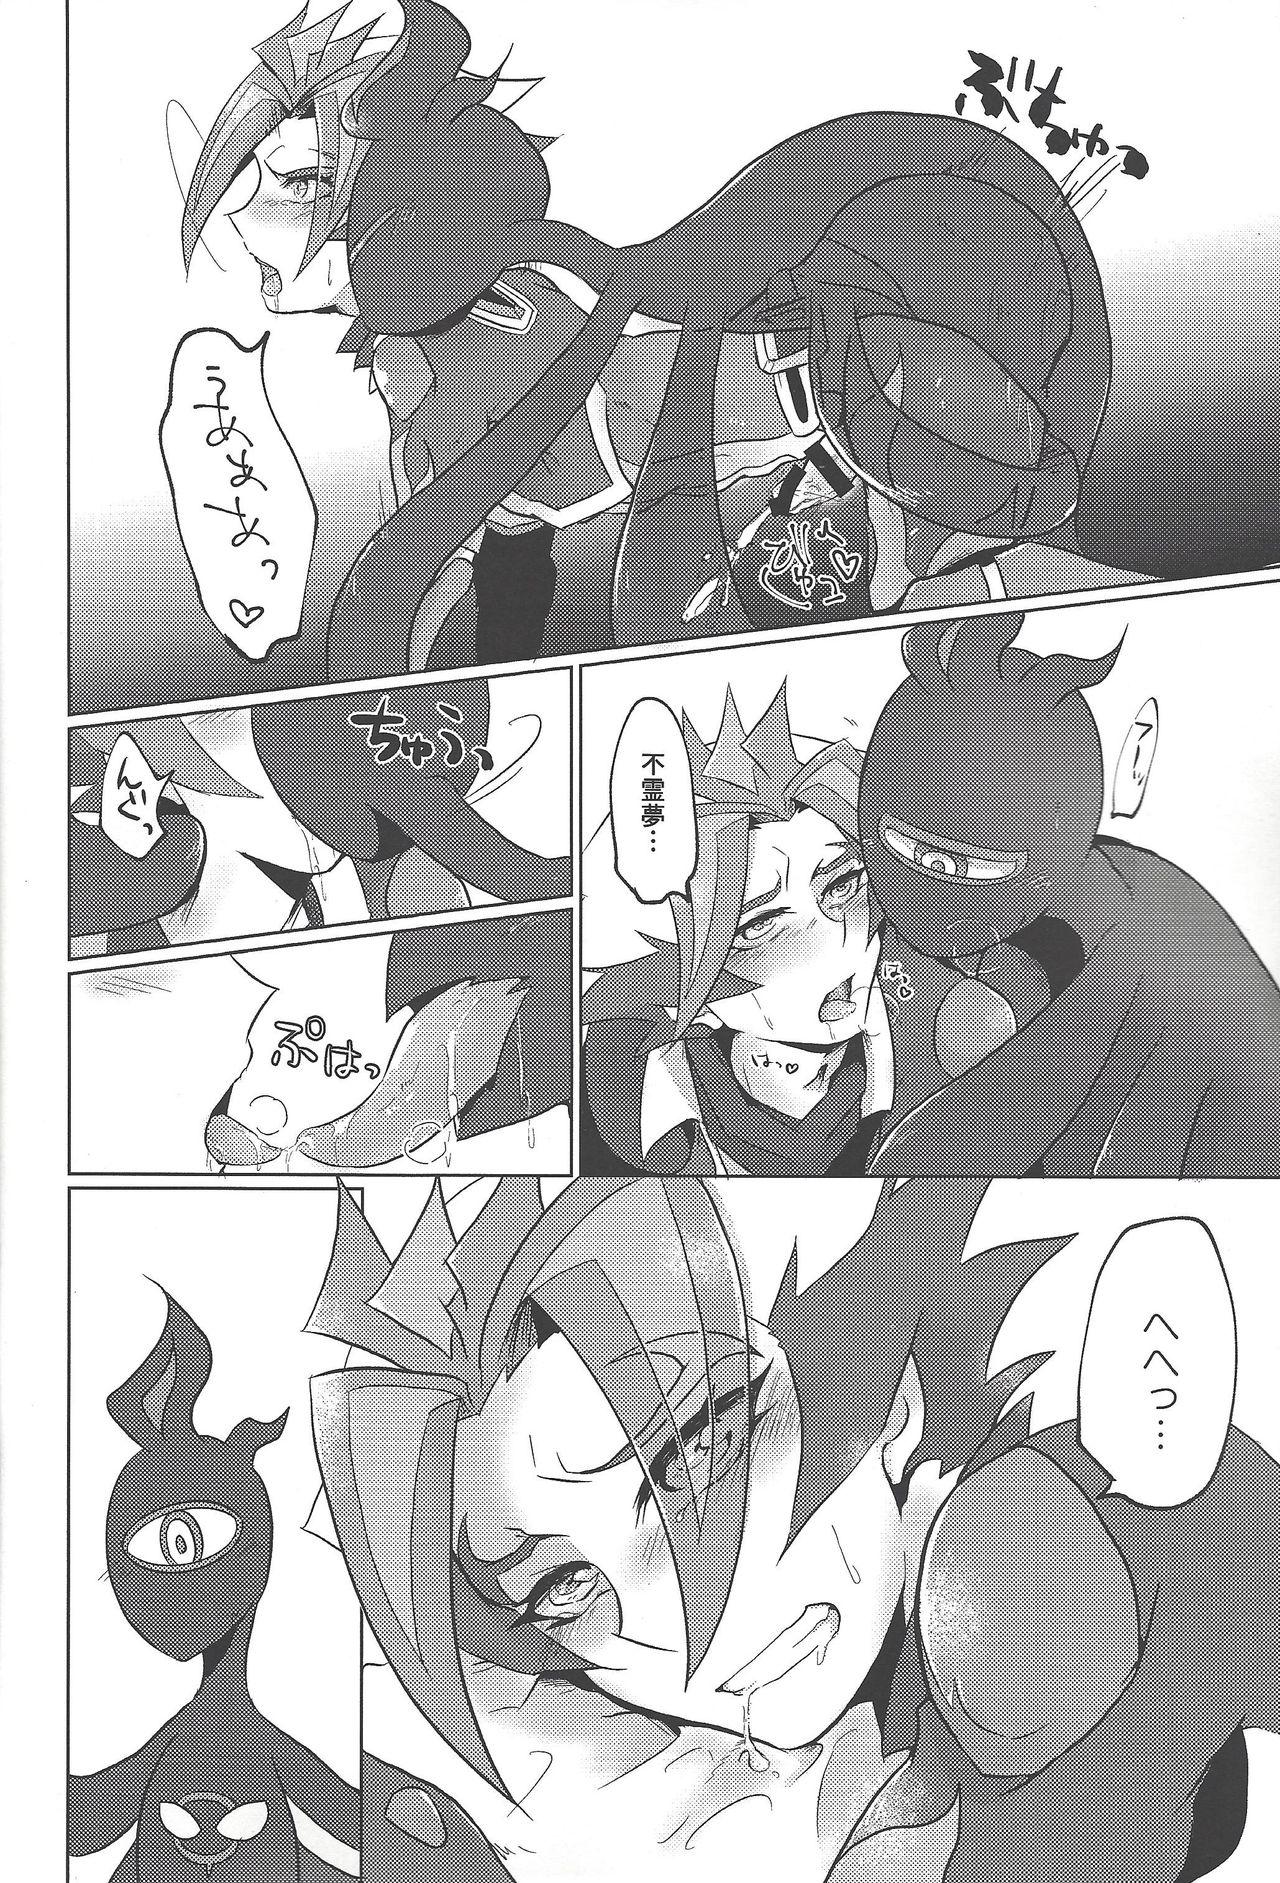 Nasty Porn Re:FRAMING - Yu-gi-oh vrains Grosso - Page 3